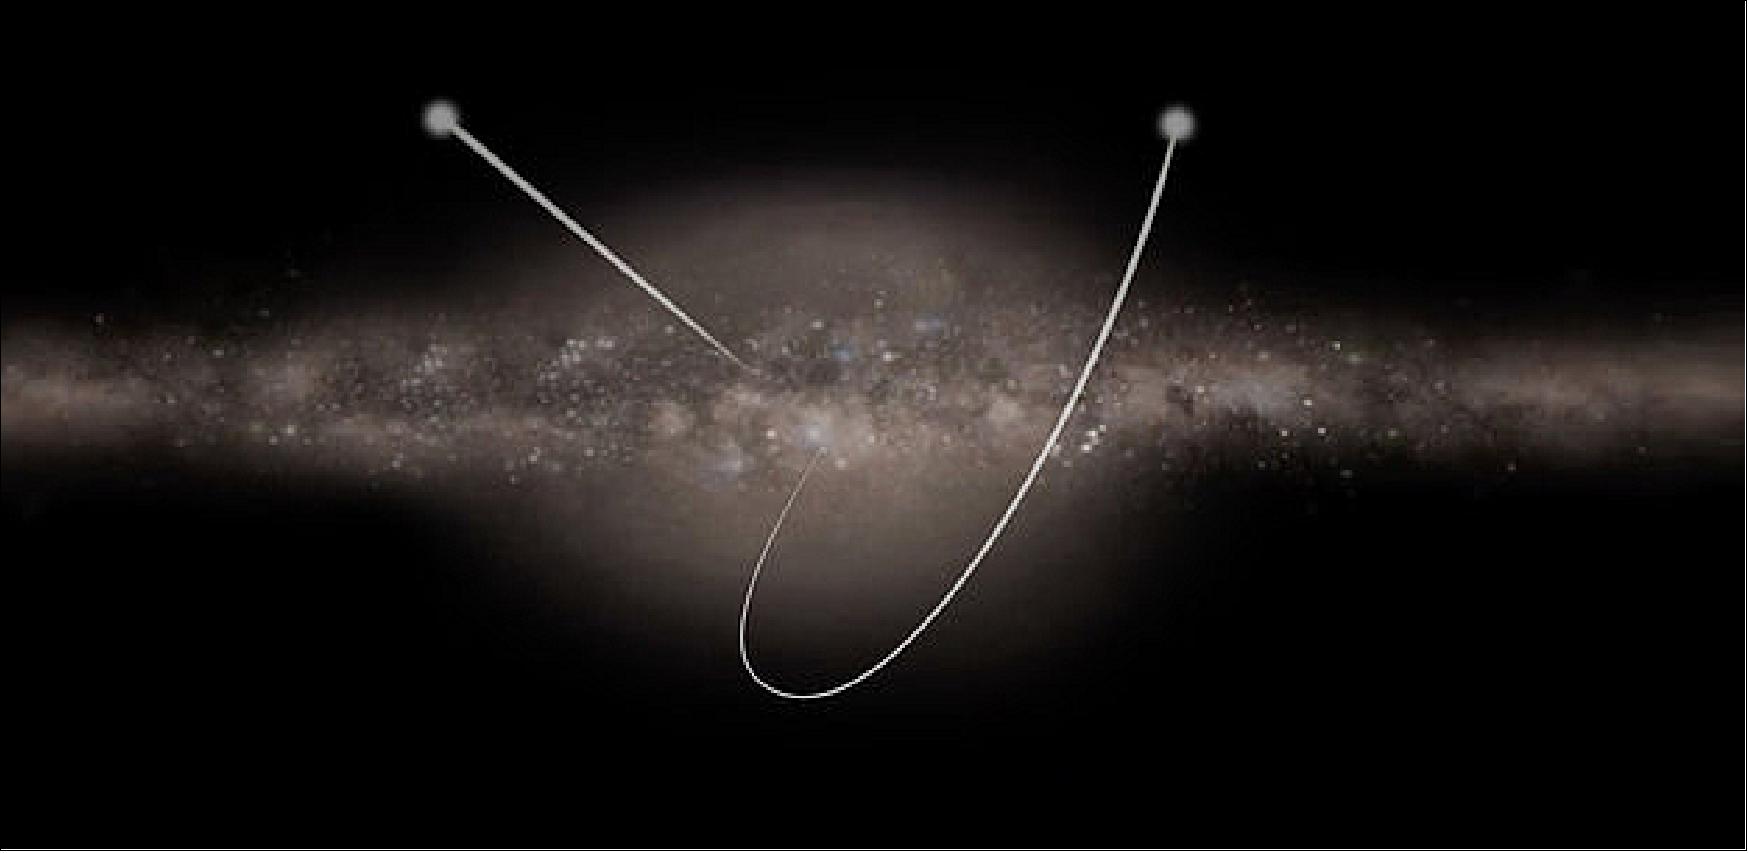 Figure 69: Artist's impression of two stars speeding from the center of our Galaxy, the Milky Way, to its outskirts. These hypervelocity stars move at several hundred of km/s, much faster than the galactic average. Their high speeds are the result of a past interaction with the supermassive black hole that sits at the center of the Milky Way and, with a mass of four million Suns, governs the orbits of stars in its vicinity (image credit: ESA, CC BY-SA 3.0 IGO)